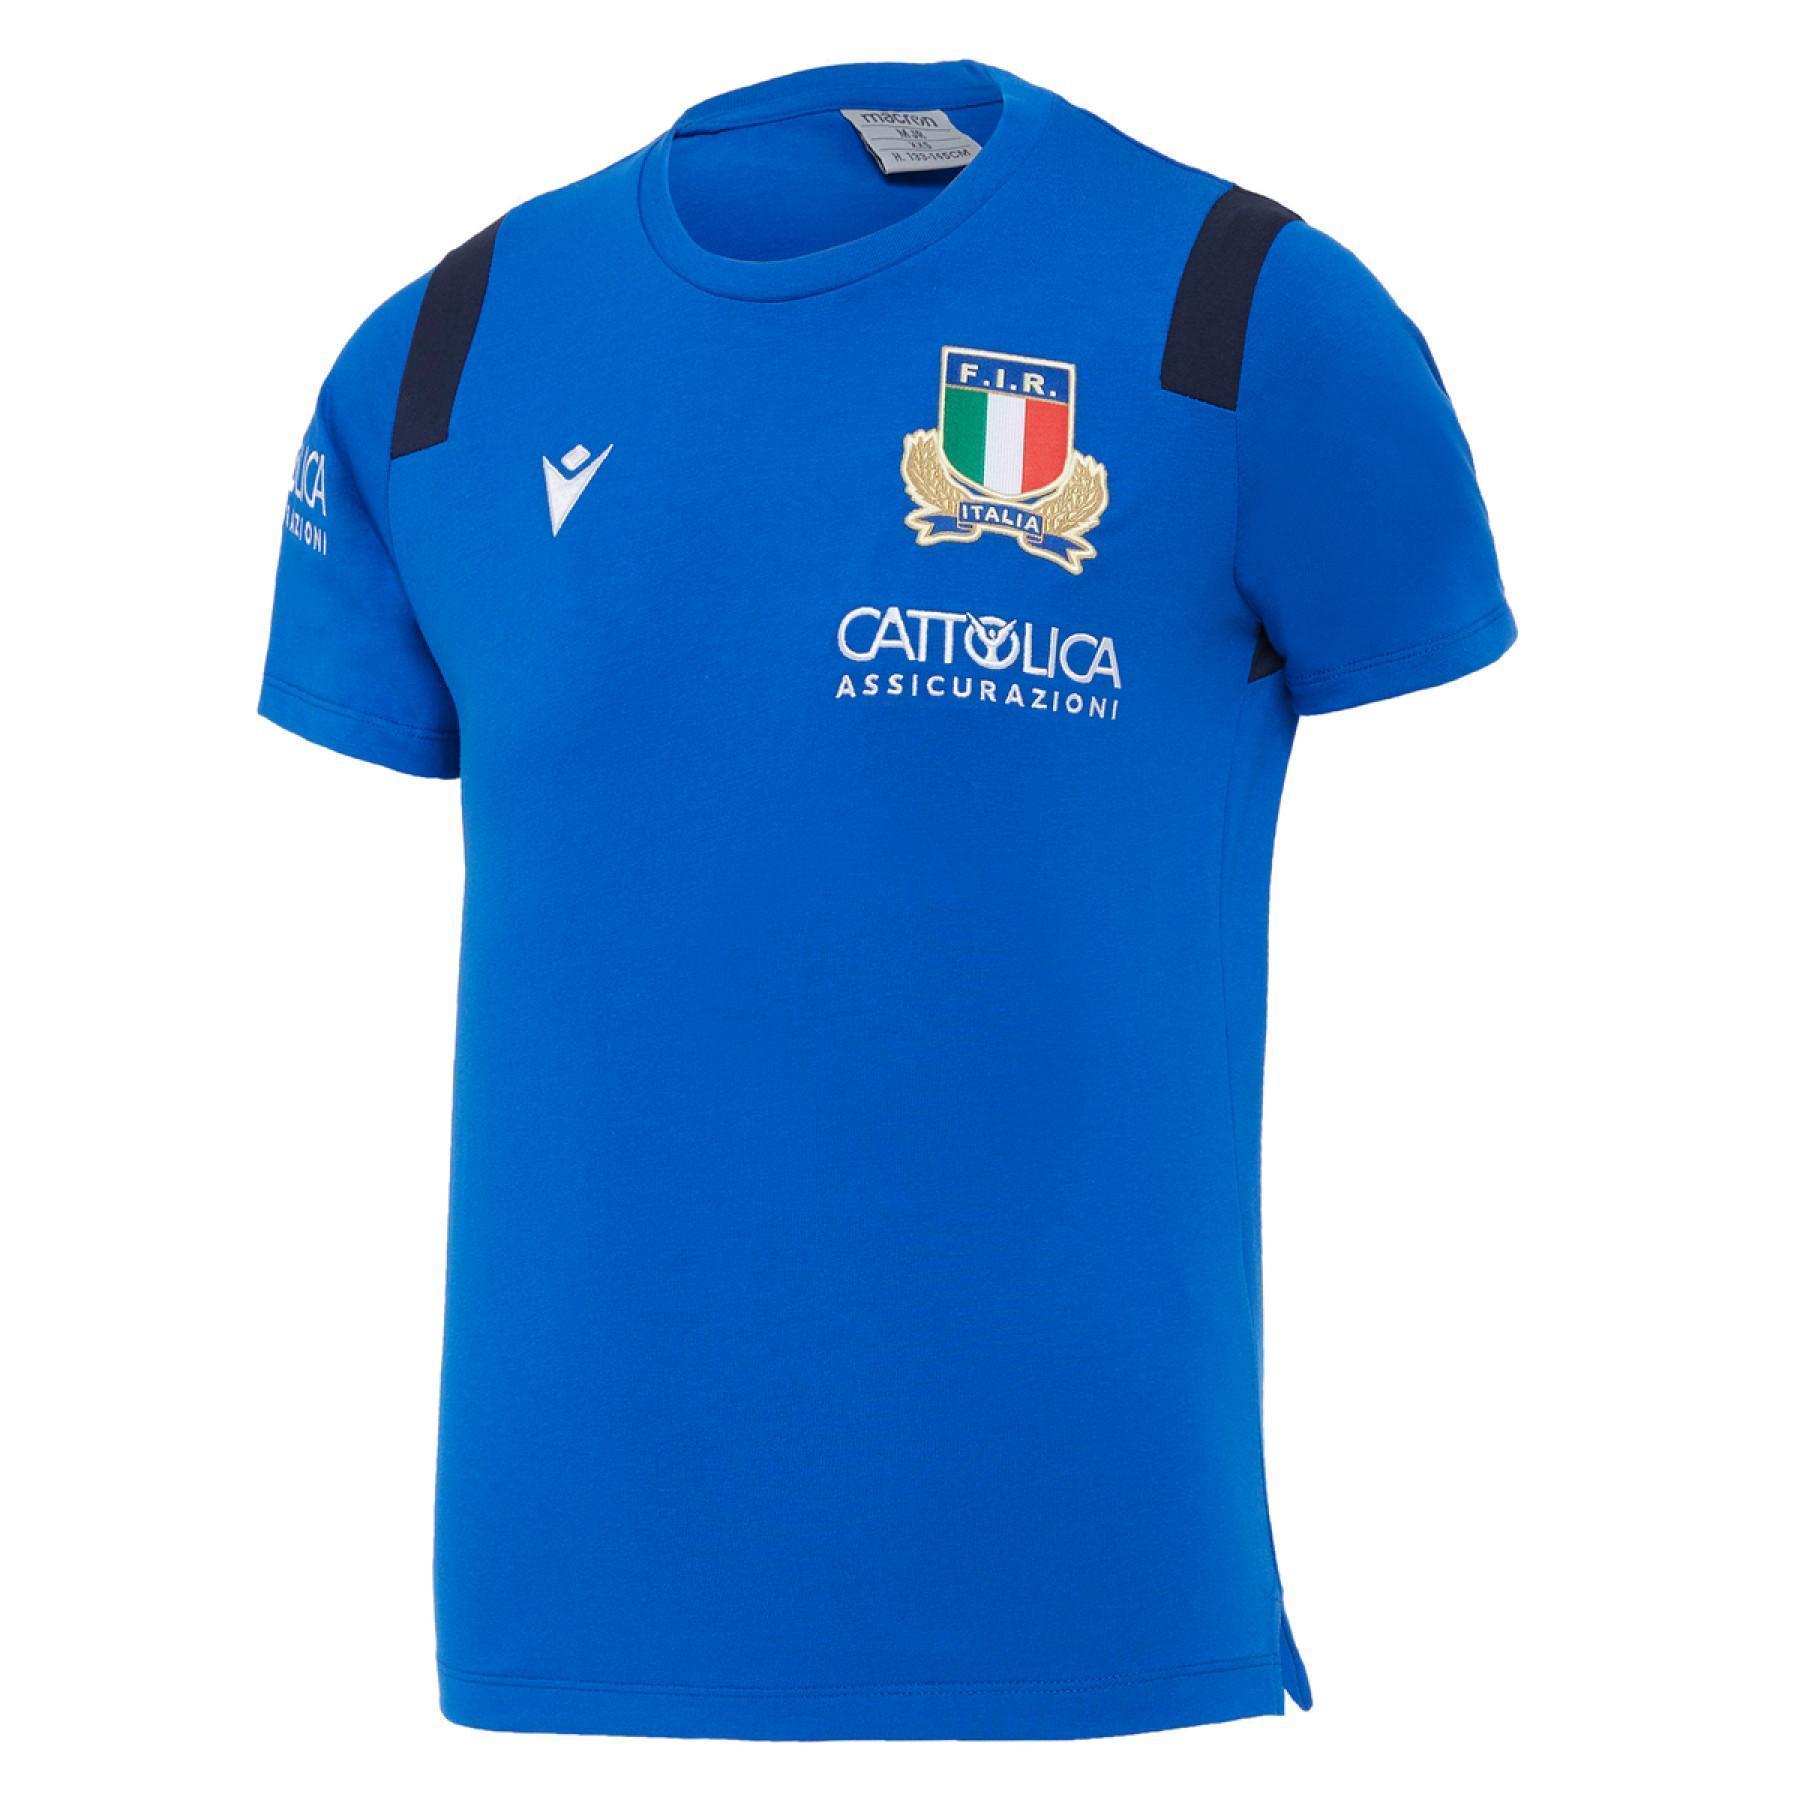 Maillot enfant coton Italie rugby 2020/21